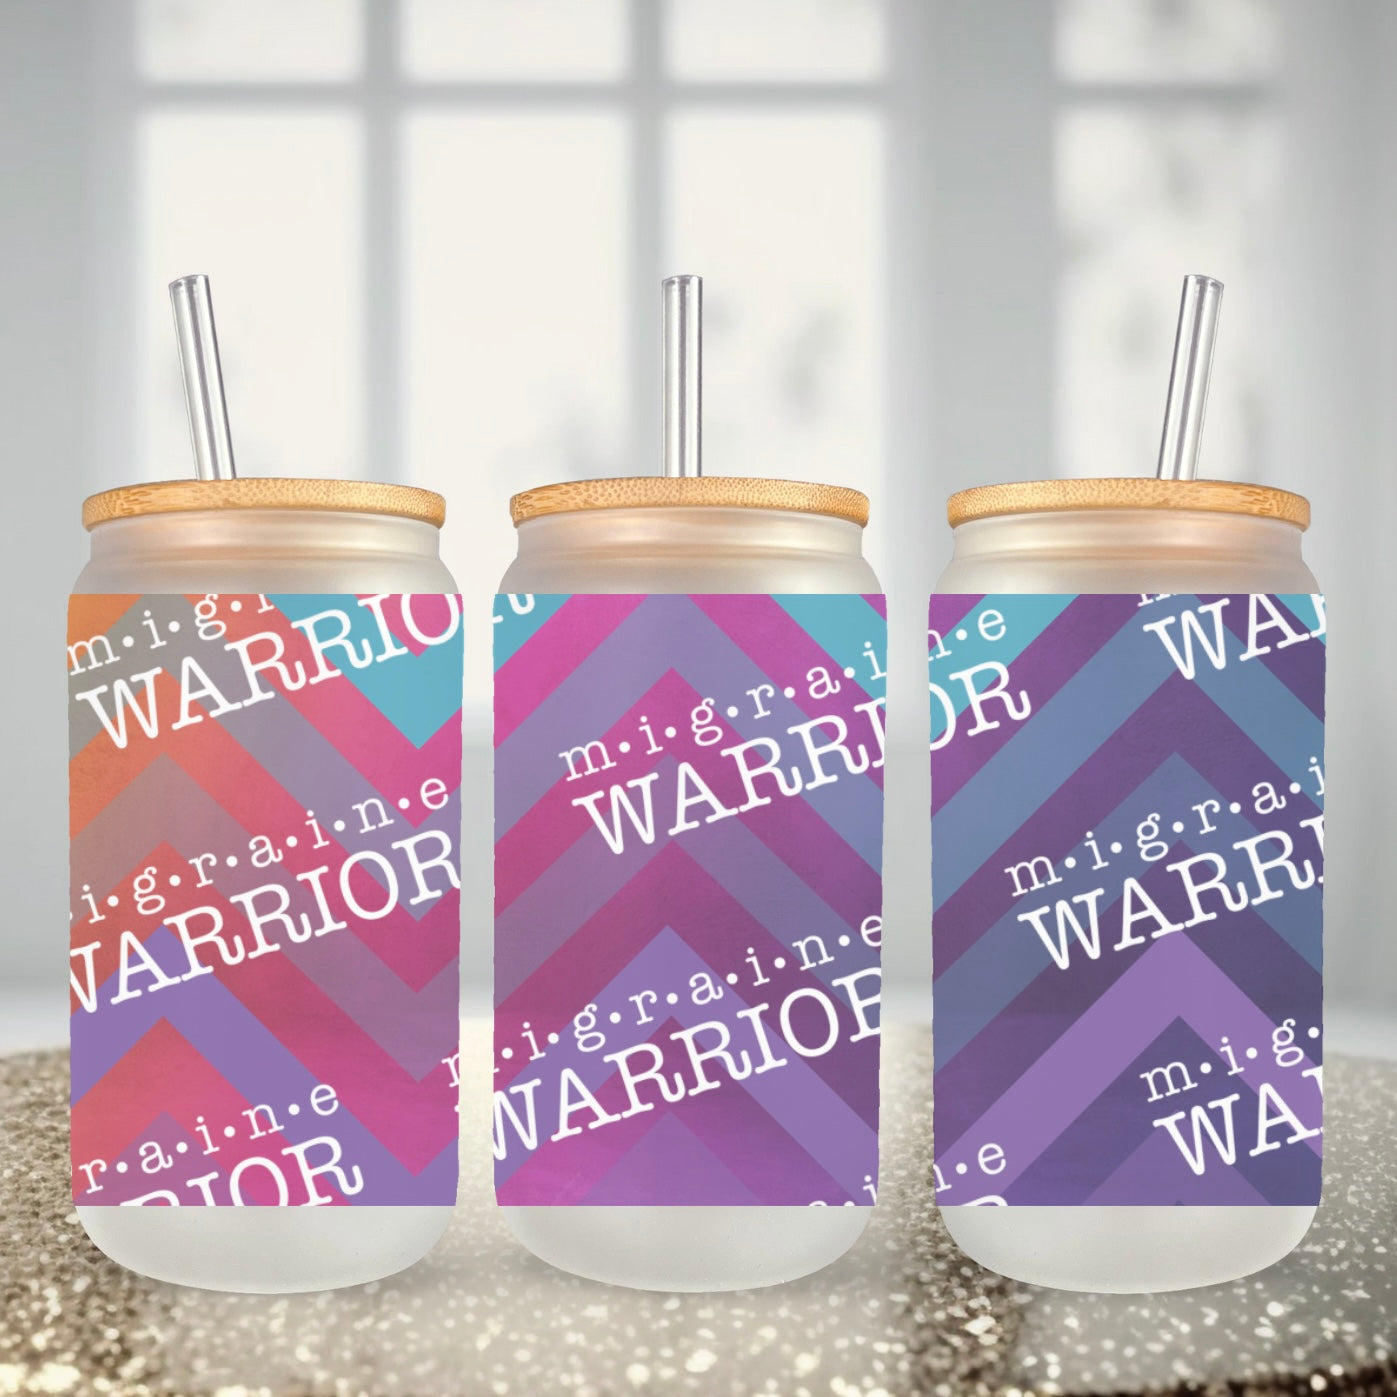 Migraine Warrior Frosted Glass Can Tumbler with Lid & Straw